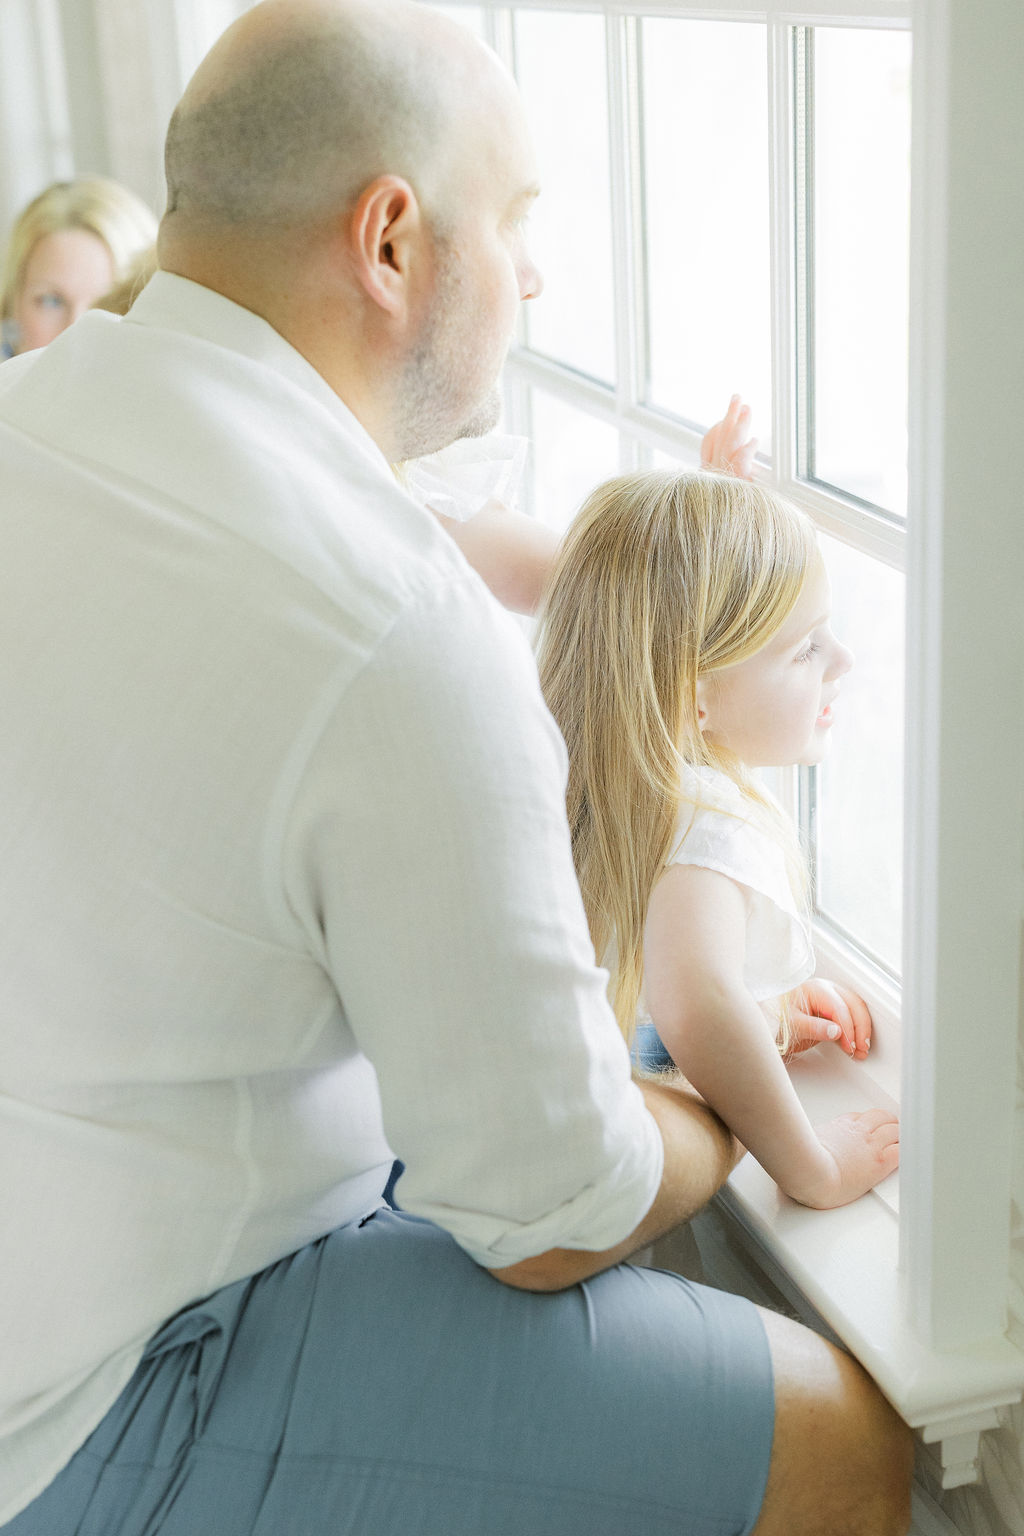 A father gazes out a window with his toddler daughter in his lap